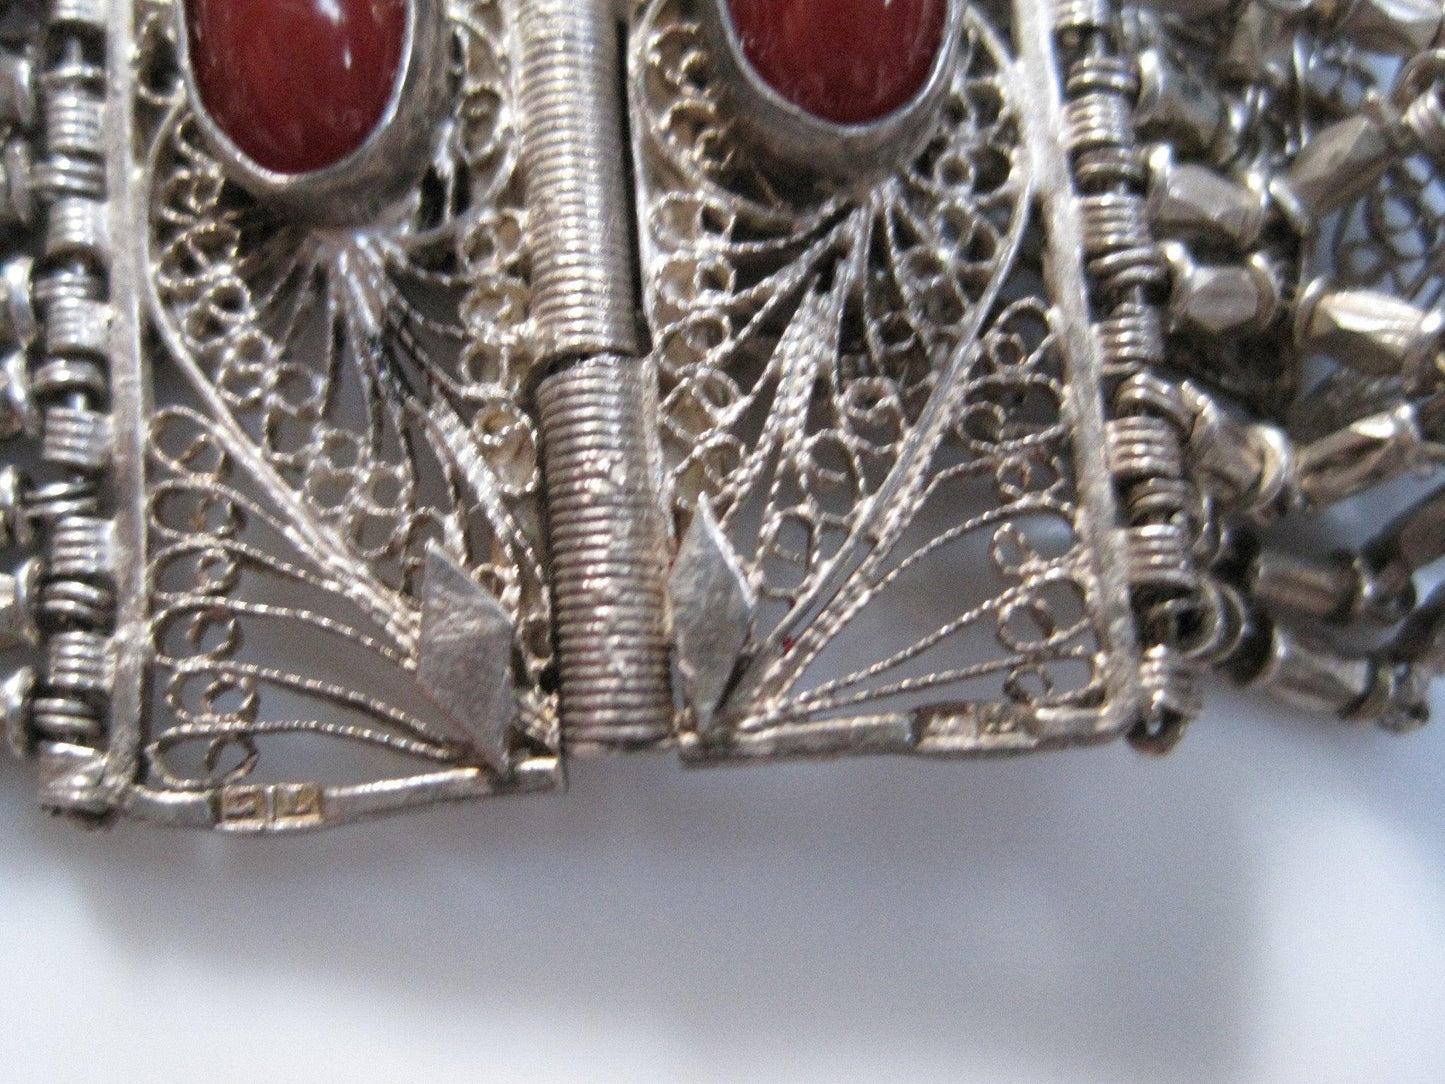 Vintage Silver and Carnelian Egyptian Link Bracelet from the 1930s - Anteeka